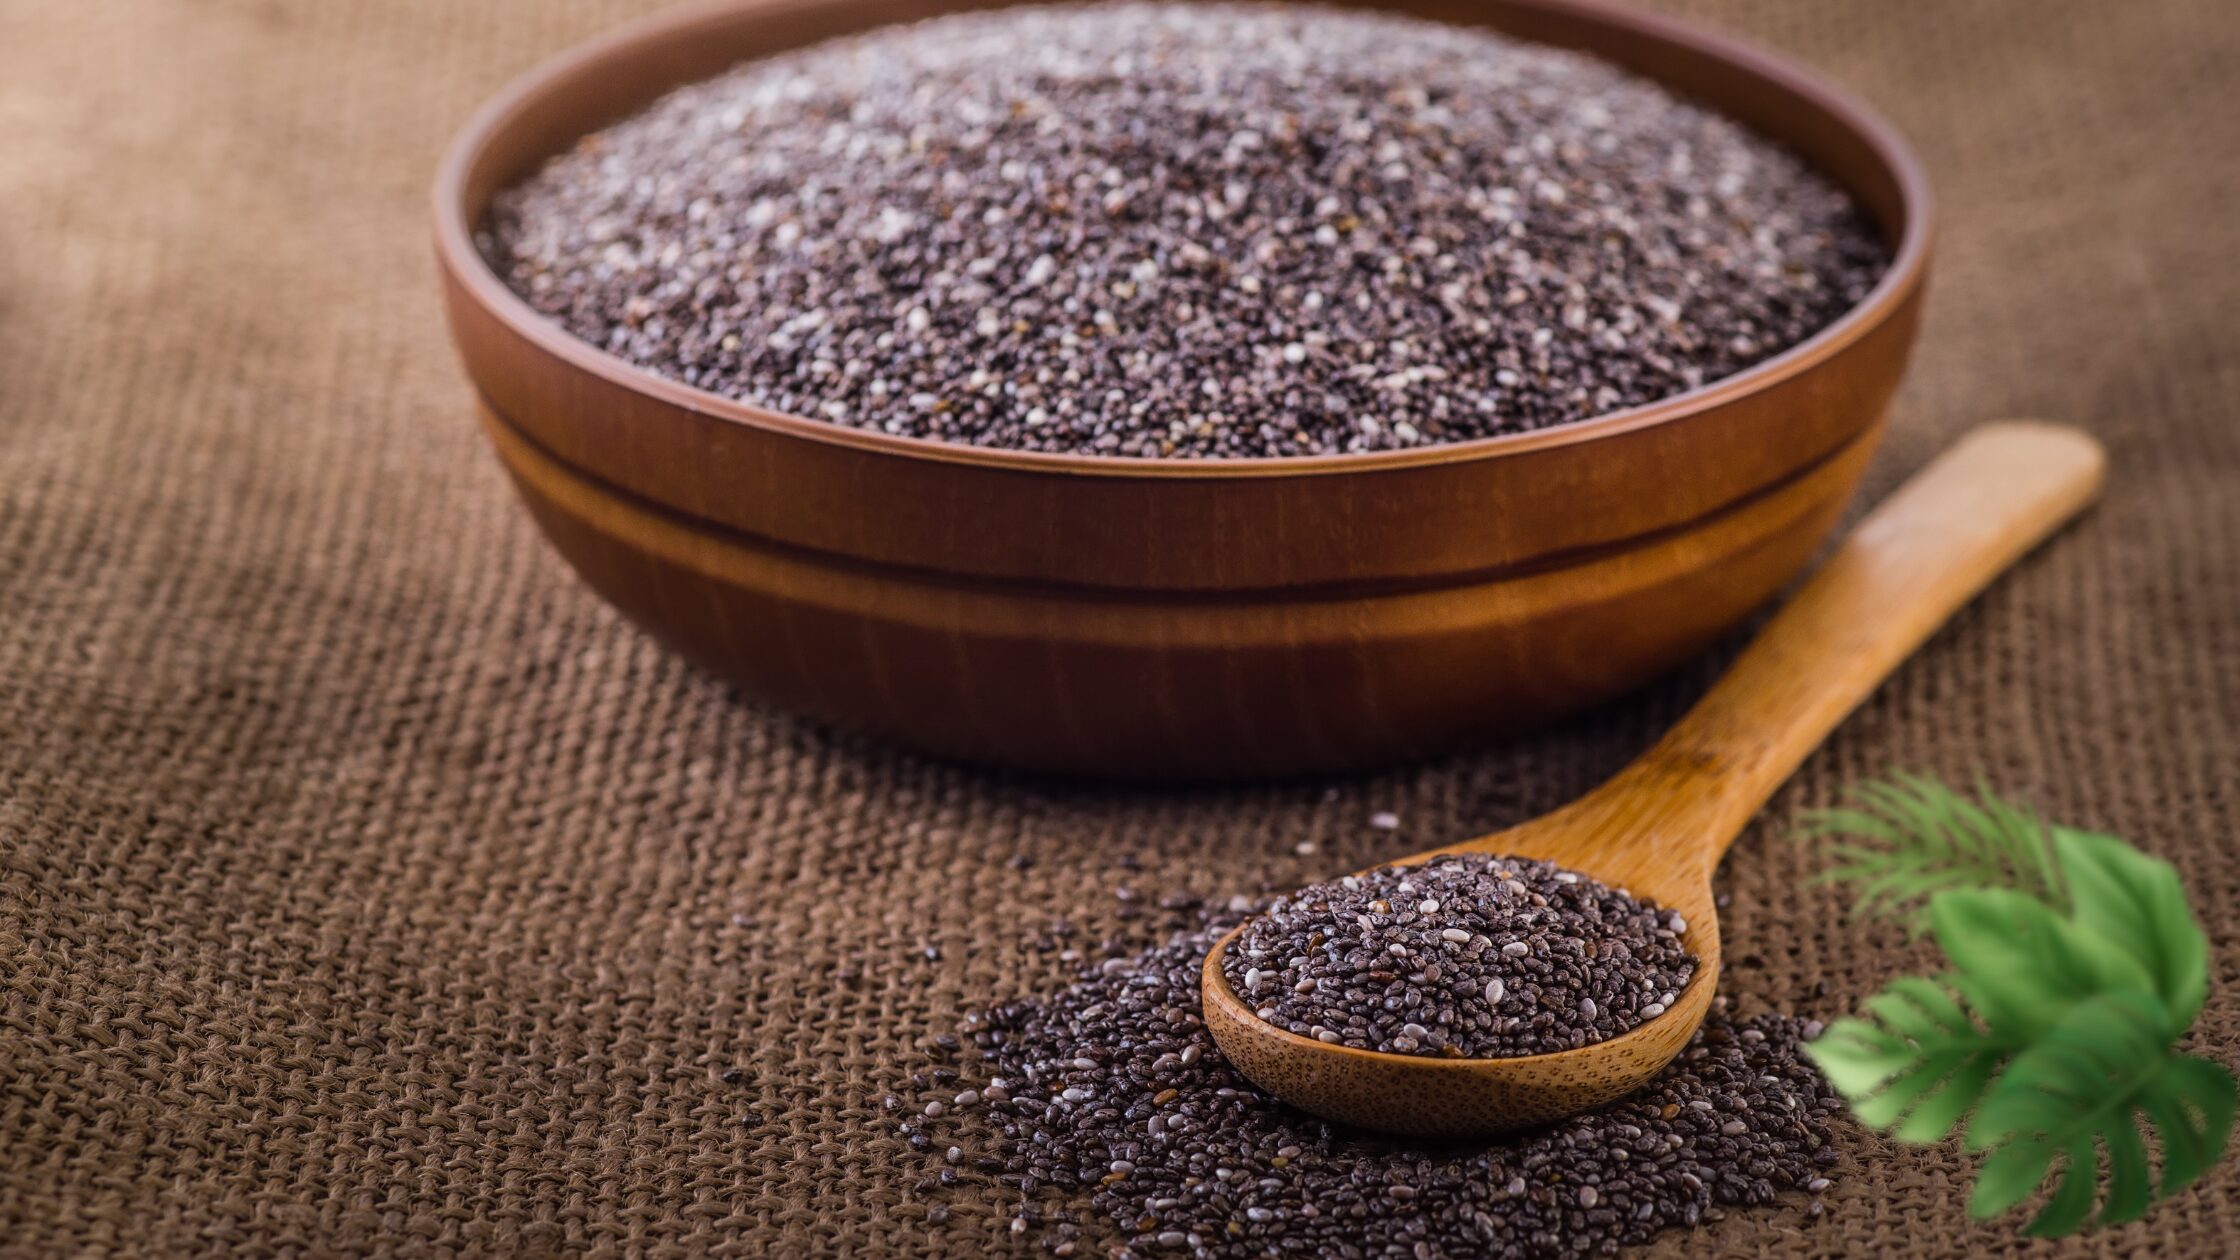 How to use chia seeds for weight loss